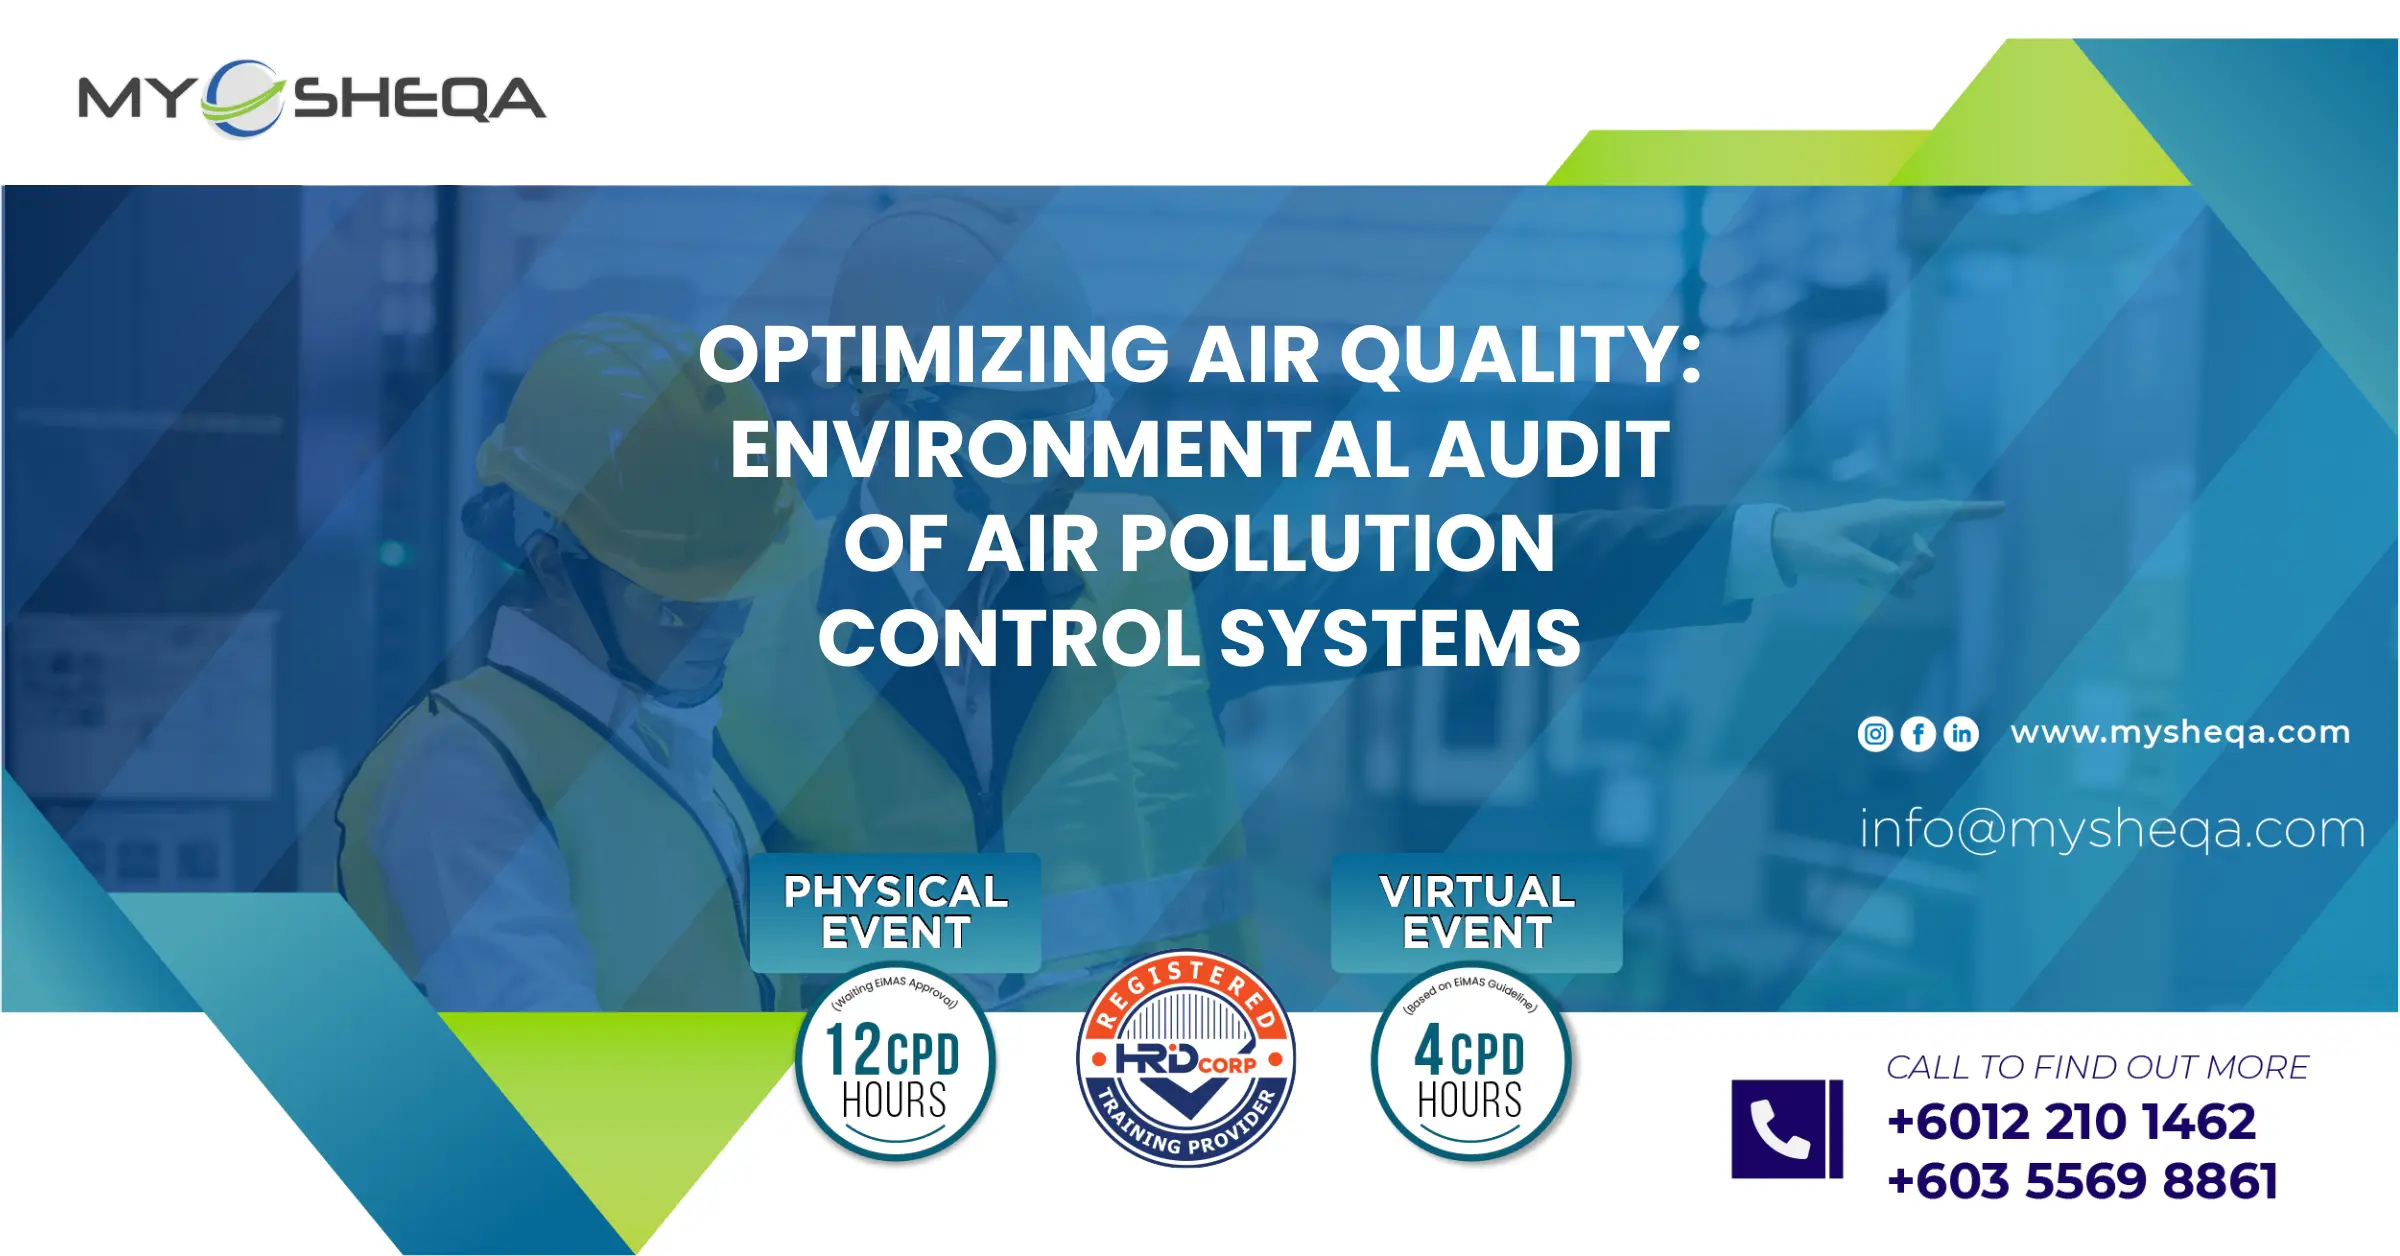 Optimizing Air Quality Environmental Audit of Air Pollution Control Systems